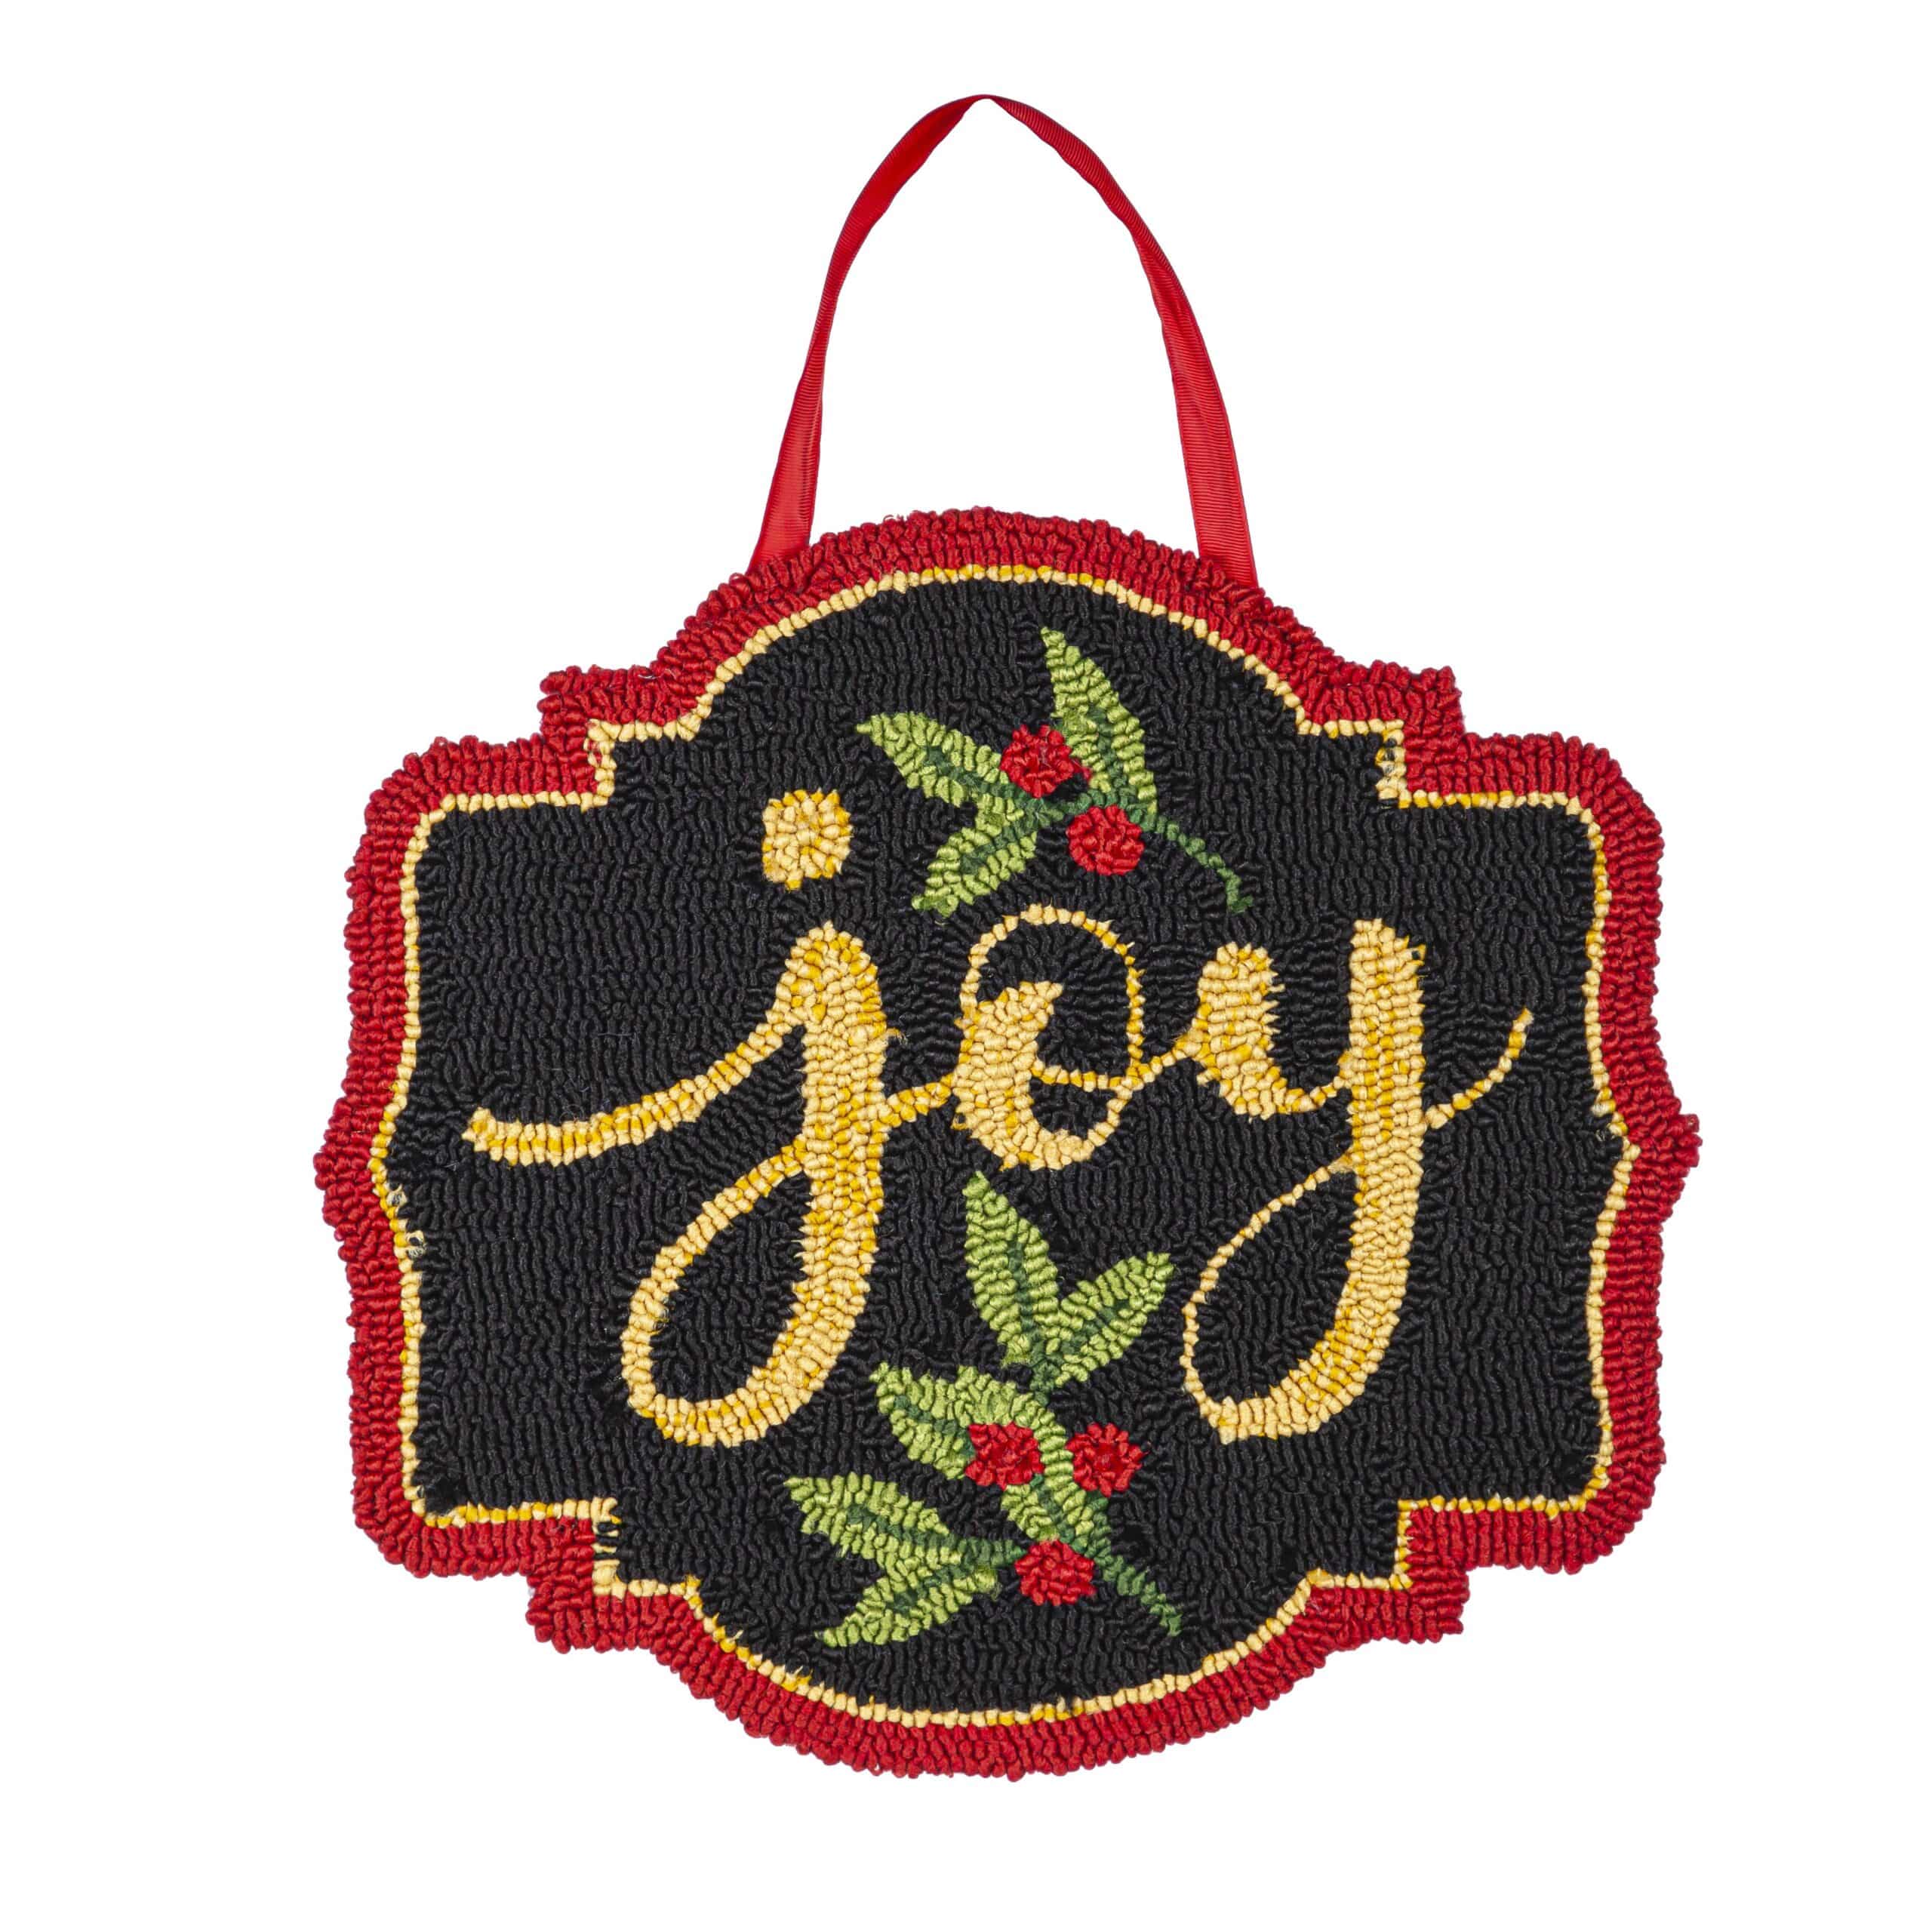 Joy and Holly Hooked Door Décor image